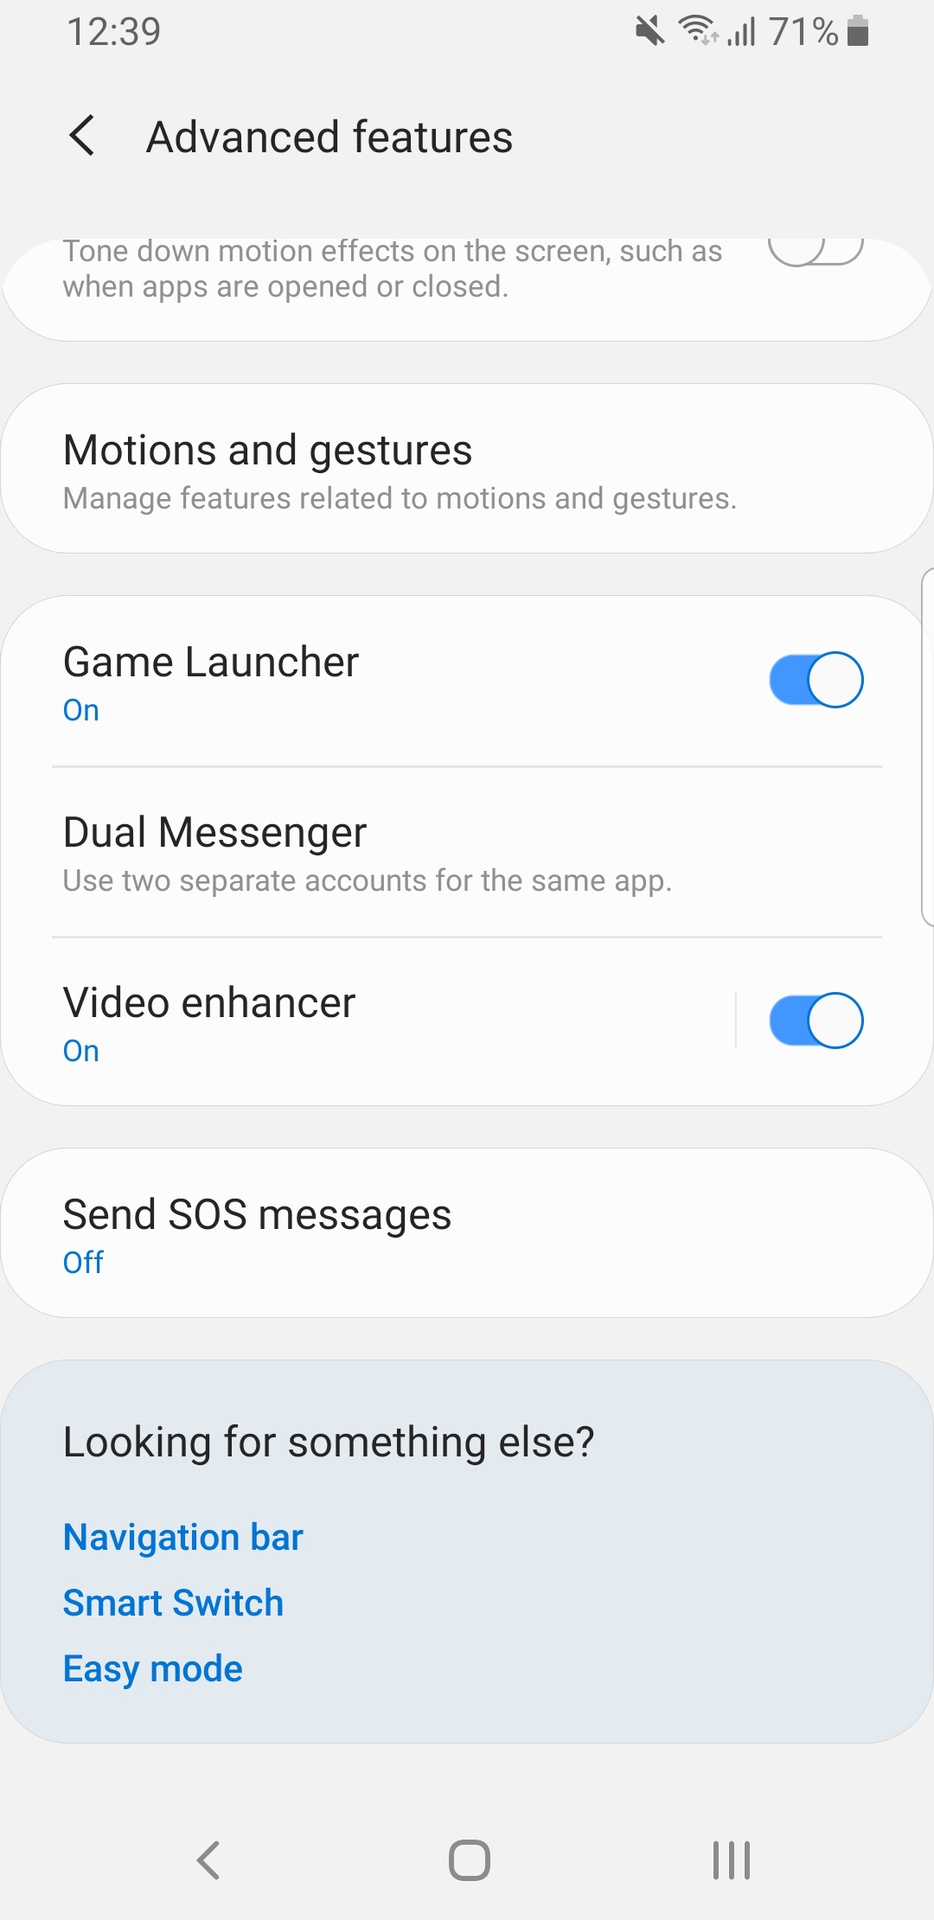 The Dual Messenger feature.